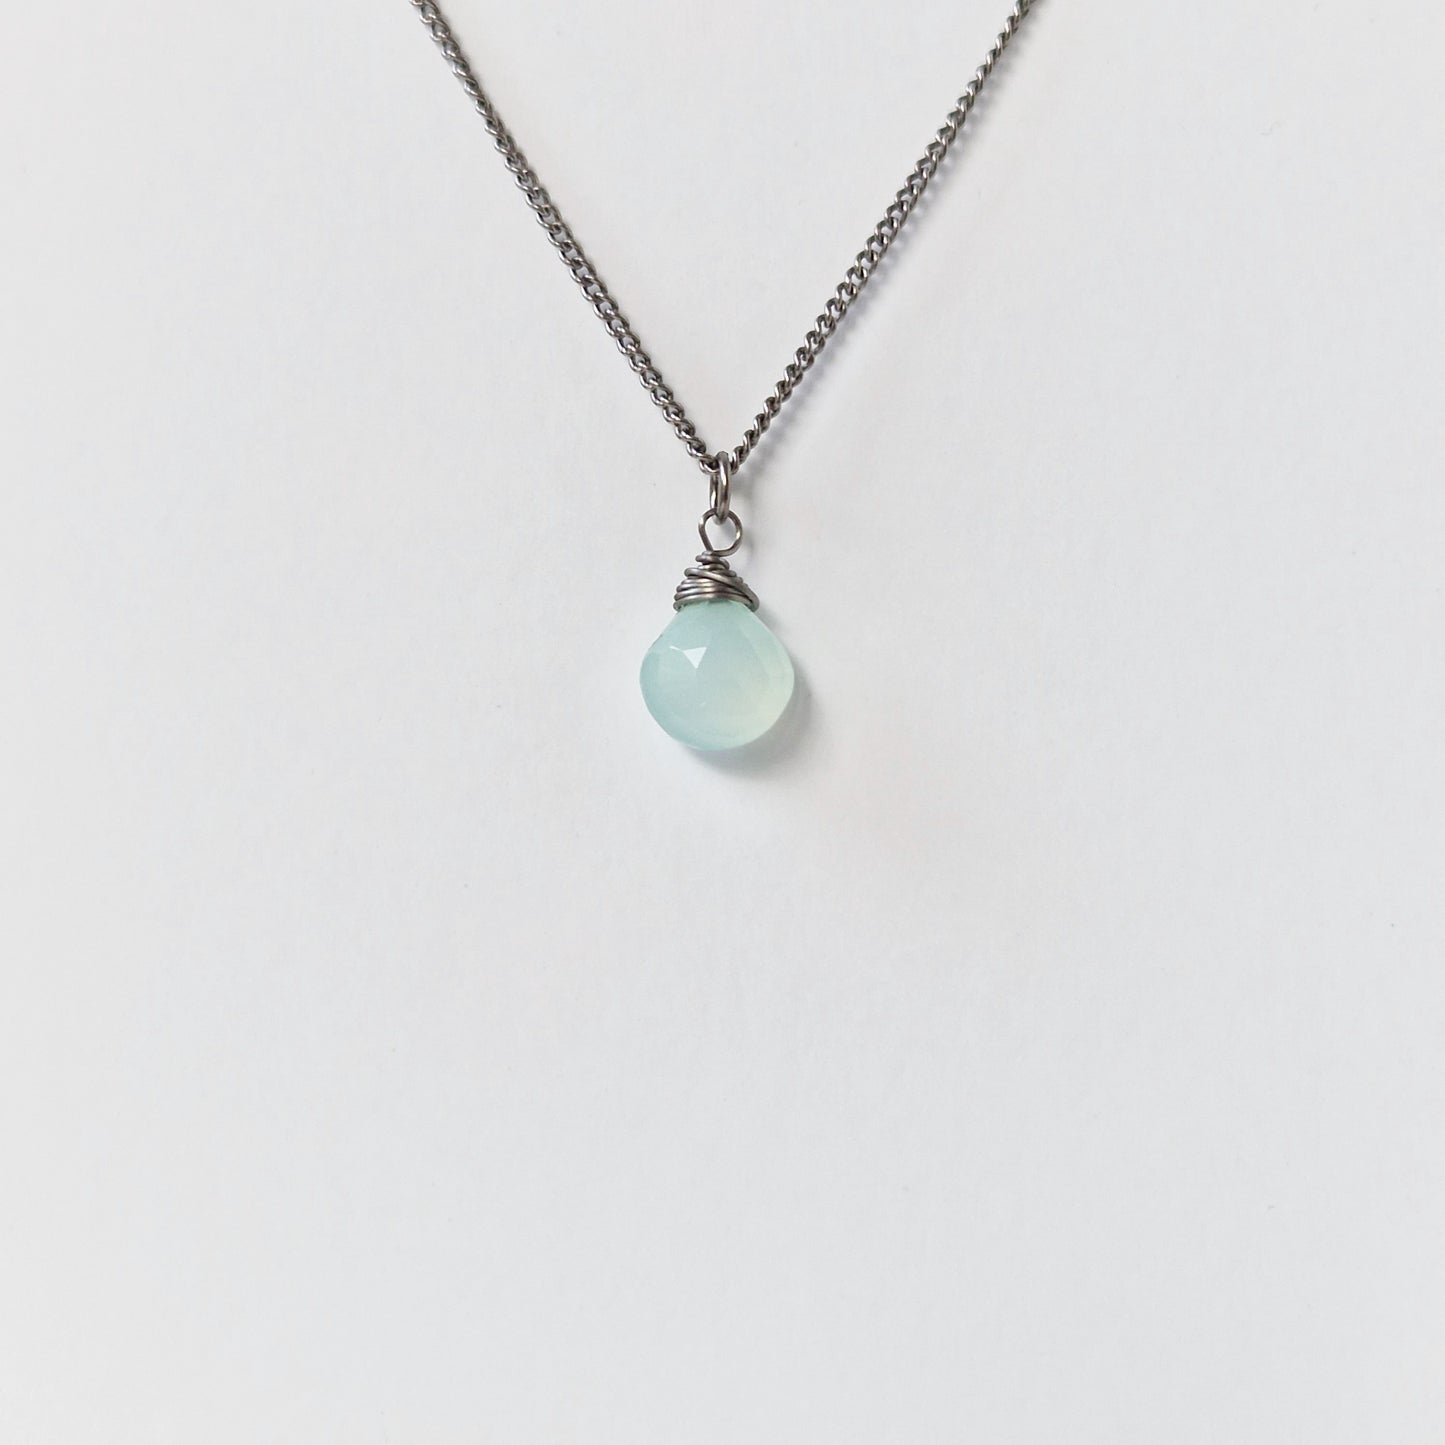 Titanium Necklace with Green Chalcedony